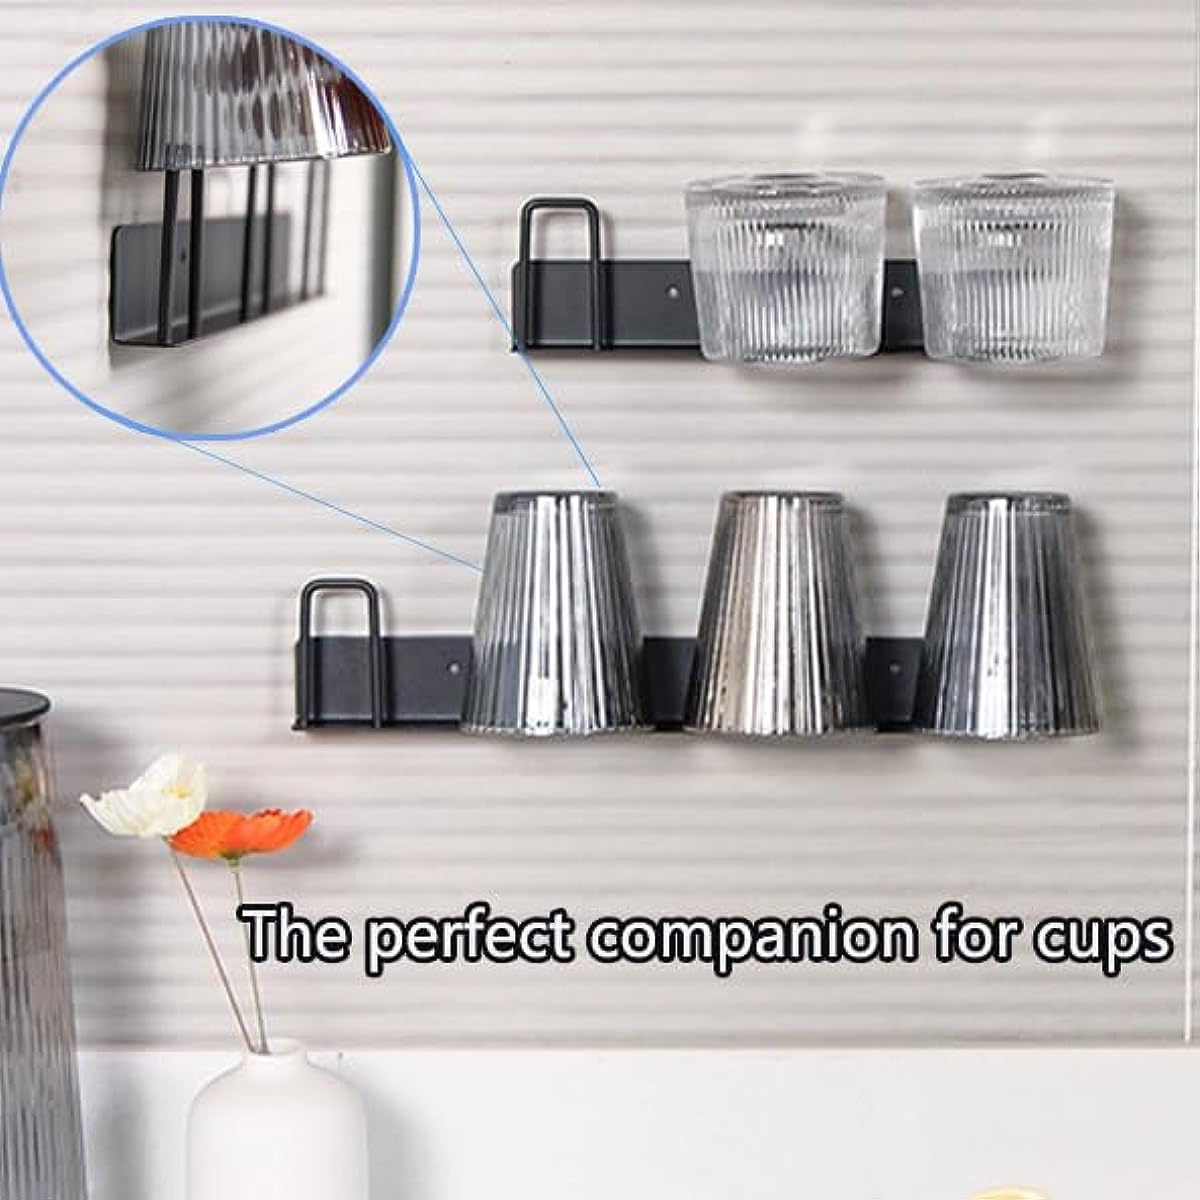 1pc Wall-Mounted Mug Holder, Coffee Cups Holder Hanger, No-Drilling Mug  Rack With 4 Cup Holders, Cups Storage Hooks For Kitchen, Living Room,  Office